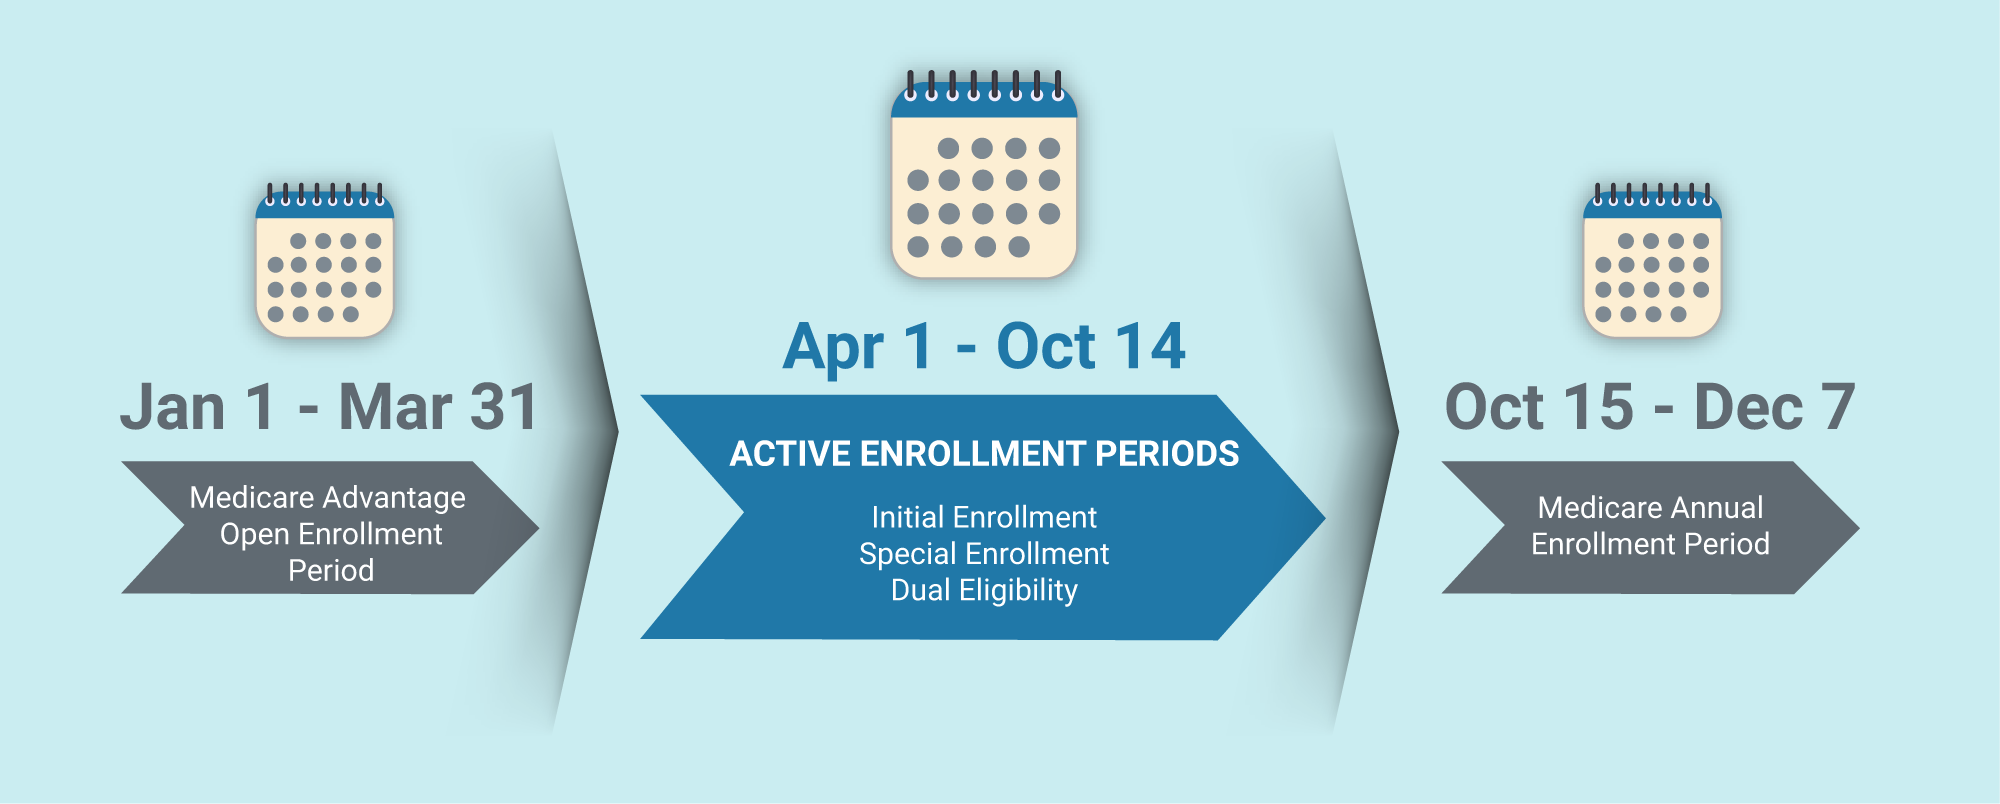 Infographic: from Apr 1-Oct 14 the active enrollment periods include IEP, SEP, and Dual Eligibility.